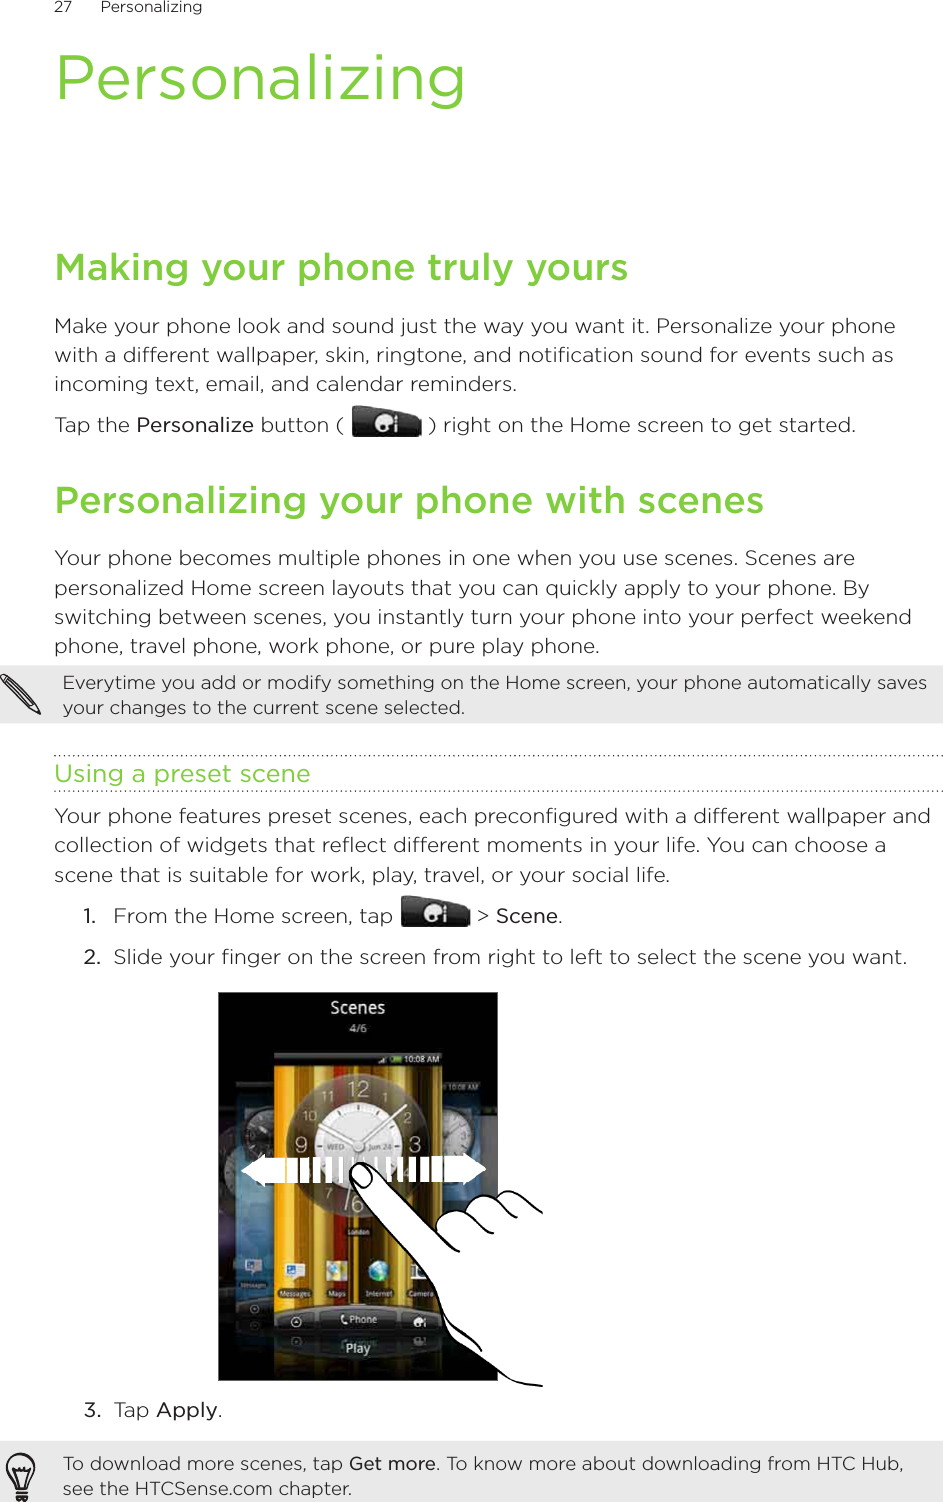 27      Personalizing      PersonalizingMaking your phone truly yoursMake your phone look and sound just the way you want it. Personalize your phone with a different wallpaper, skin, ringtone, and notification sound for events such as incoming text, email, and calendar reminders.Tap the Personalize button (   ) right on the Home screen to get started.Personalizing your phone with scenesYour phone becomes multiple phones in one when you use scenes. Scenes are personalized Home screen layouts that you can quickly apply to your phone. By switching between scenes, you instantly turn your phone into your perfect weekend phone, travel phone, work phone, or pure play phone.Everytime you add or modify something on the Home screen, your phone automatically saves your changes to the current scene selected.Using a preset sceneYour phone features preset scenes, each preconfigured with a different wallpaper and collection of widgets that reflect different moments in your life. You can choose a scene that is suitable for work, play, travel, or your social life.From the Home screen, tap   &gt; Scene.Slide your finger on the screen from right to left to select the scene you want.3.  Tap Apply.To download more scenes, tap Get more. To know more about downloading from HTC Hub, see the HTCSense.com chapter.1.2.